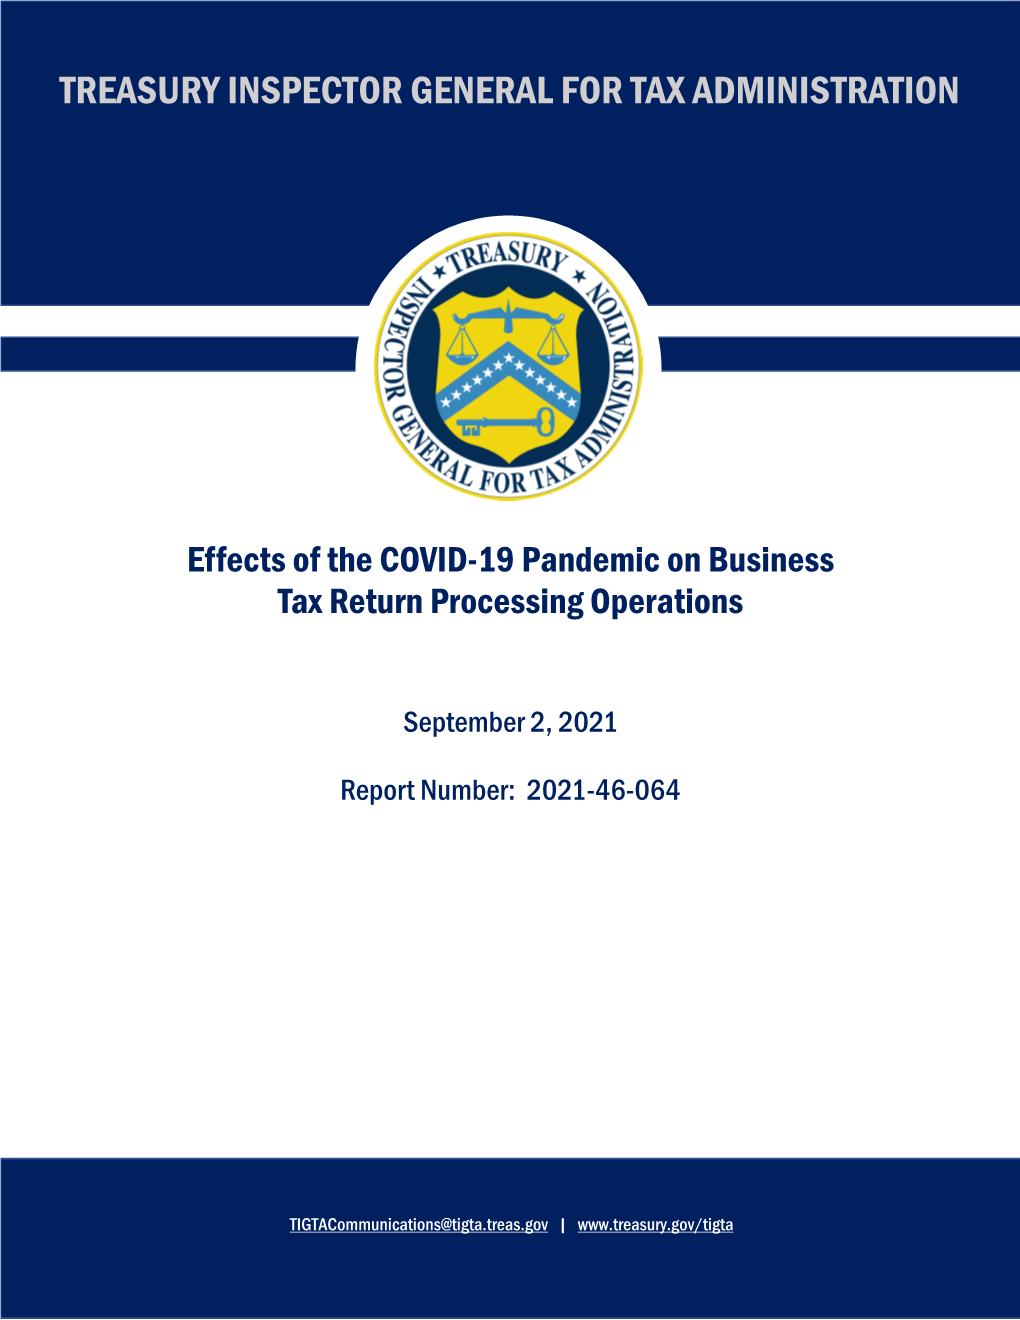 Effects of the COVID-19 Pandemic on Business Tax Return Processing Operations